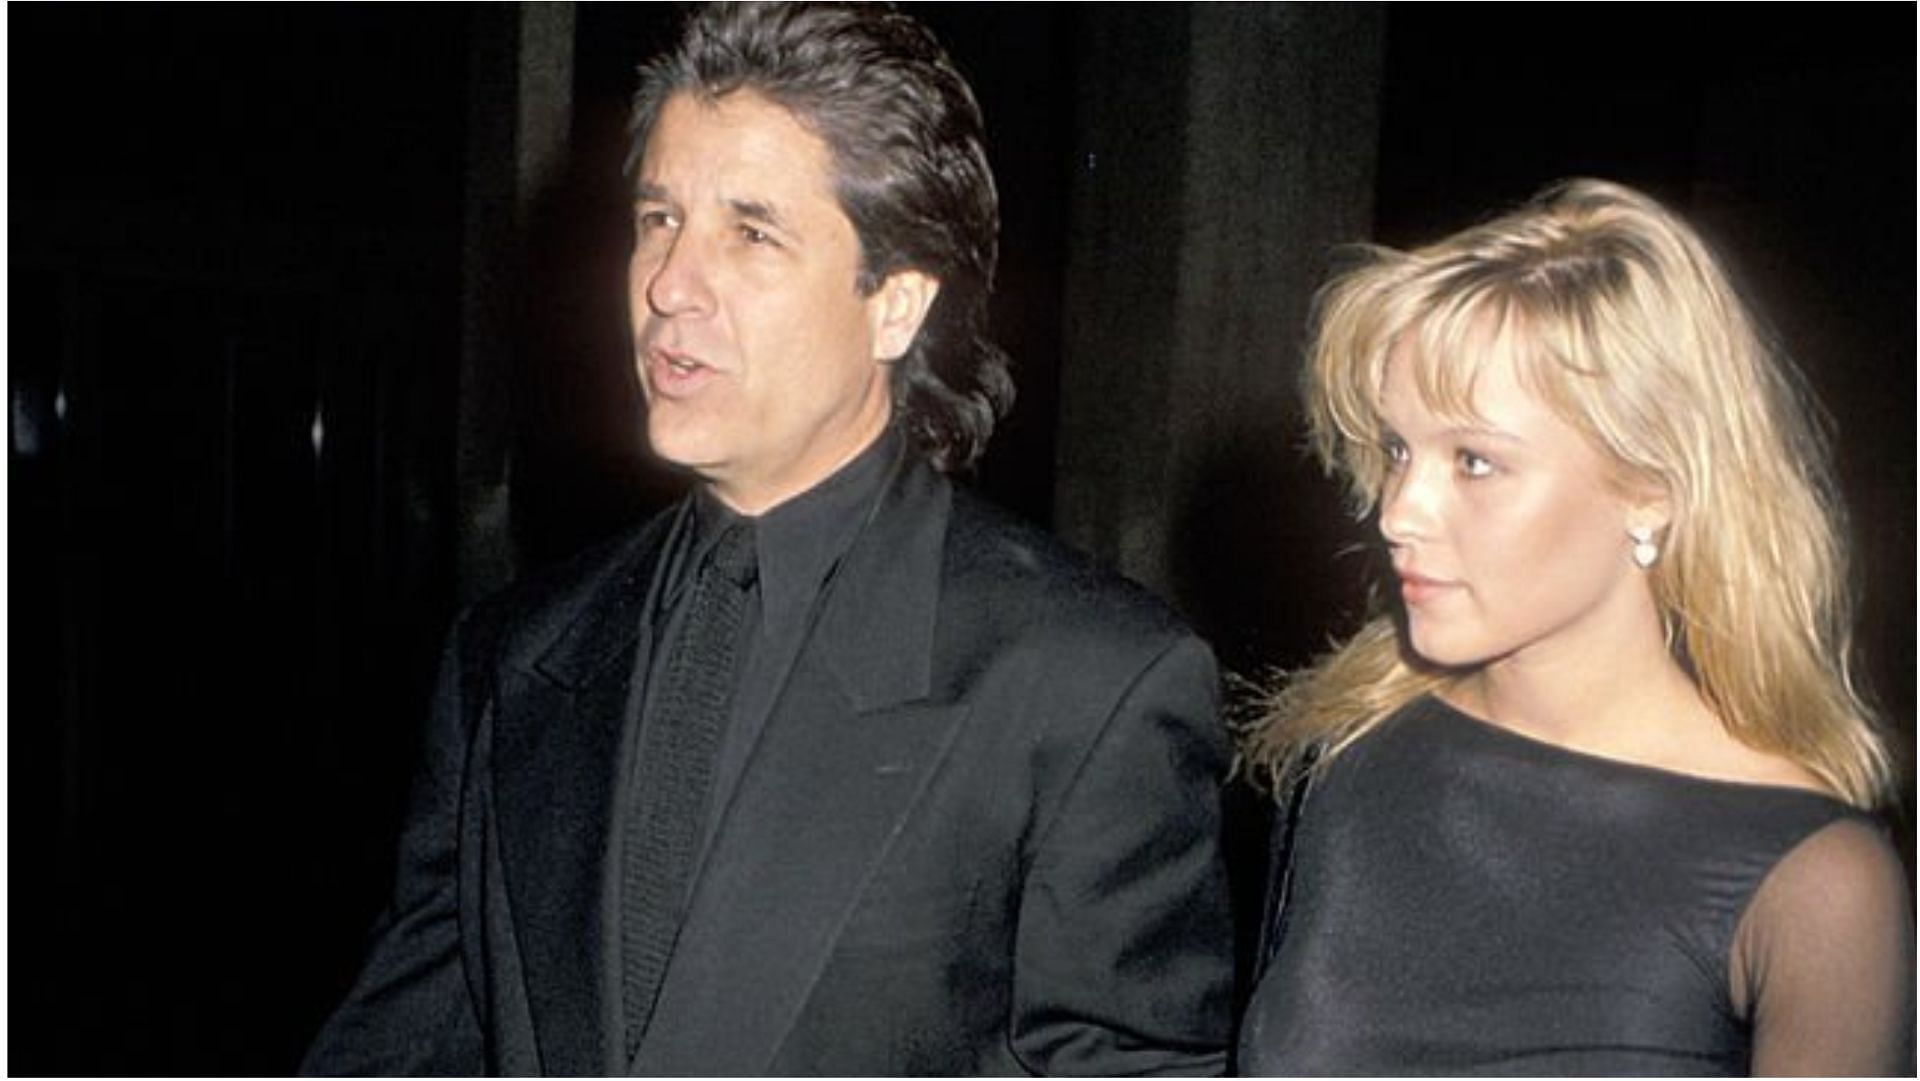 Jon Peters has stated that he will leave $10 million for Pamela Anderson in his will (Image via Jim Smeal/Getty Images)